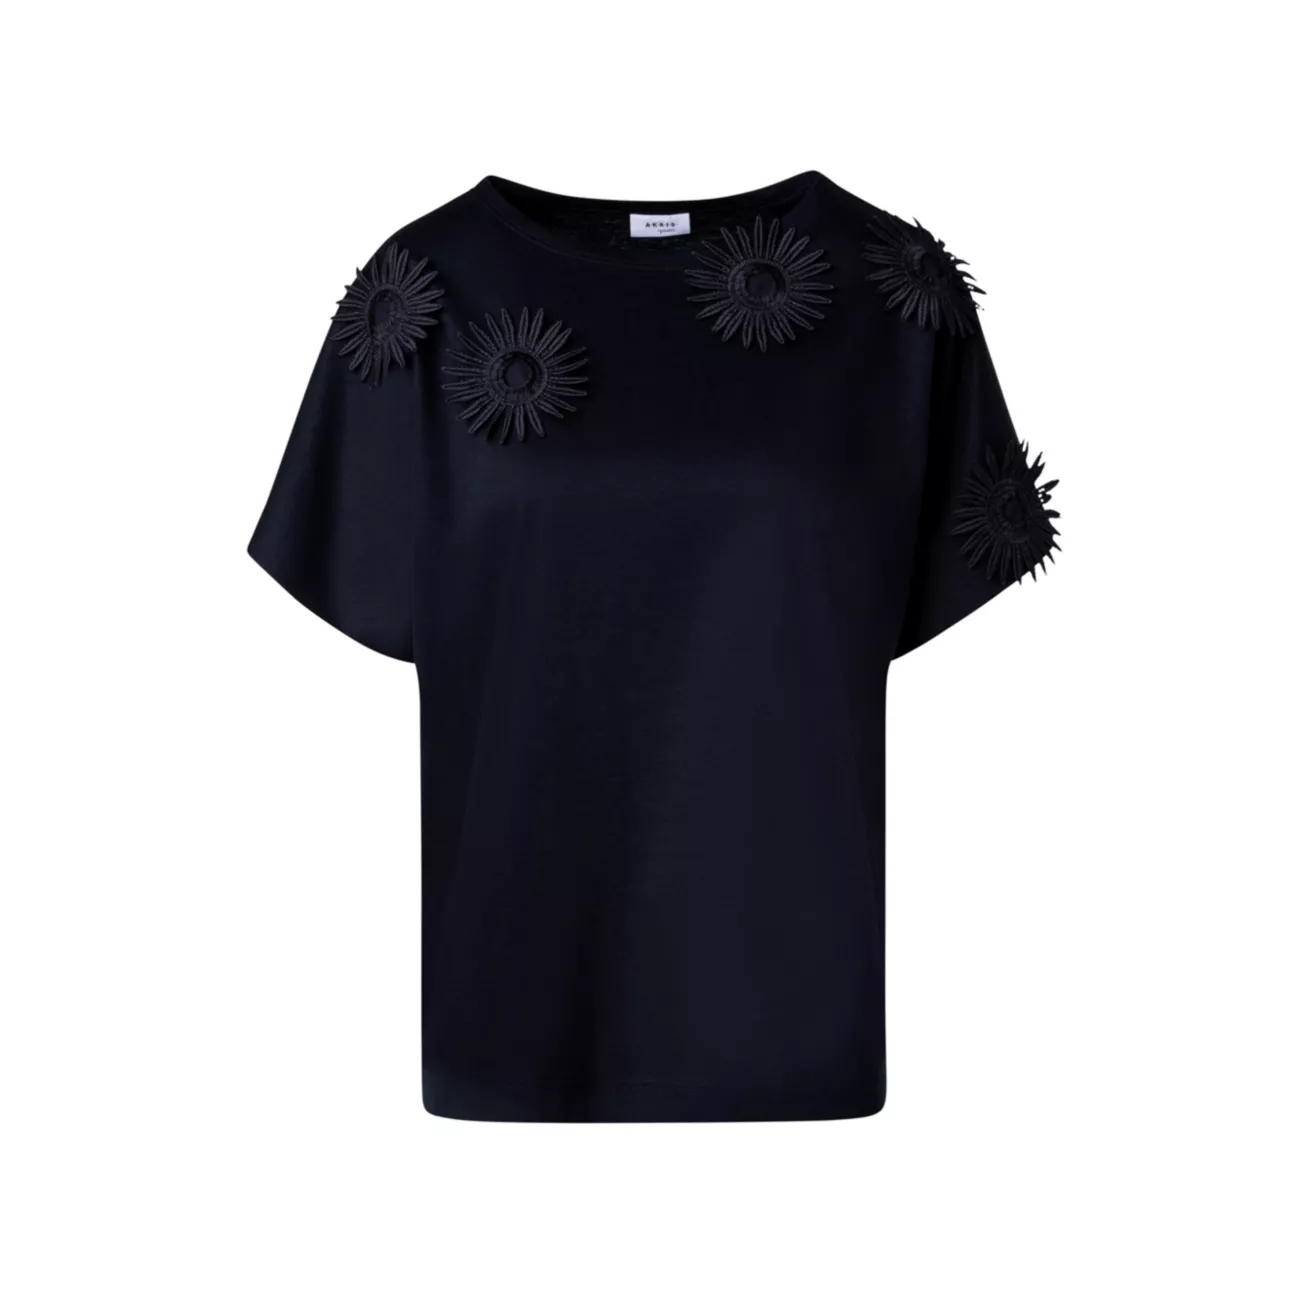 Embroidered Floral T-Shirt Akris punto